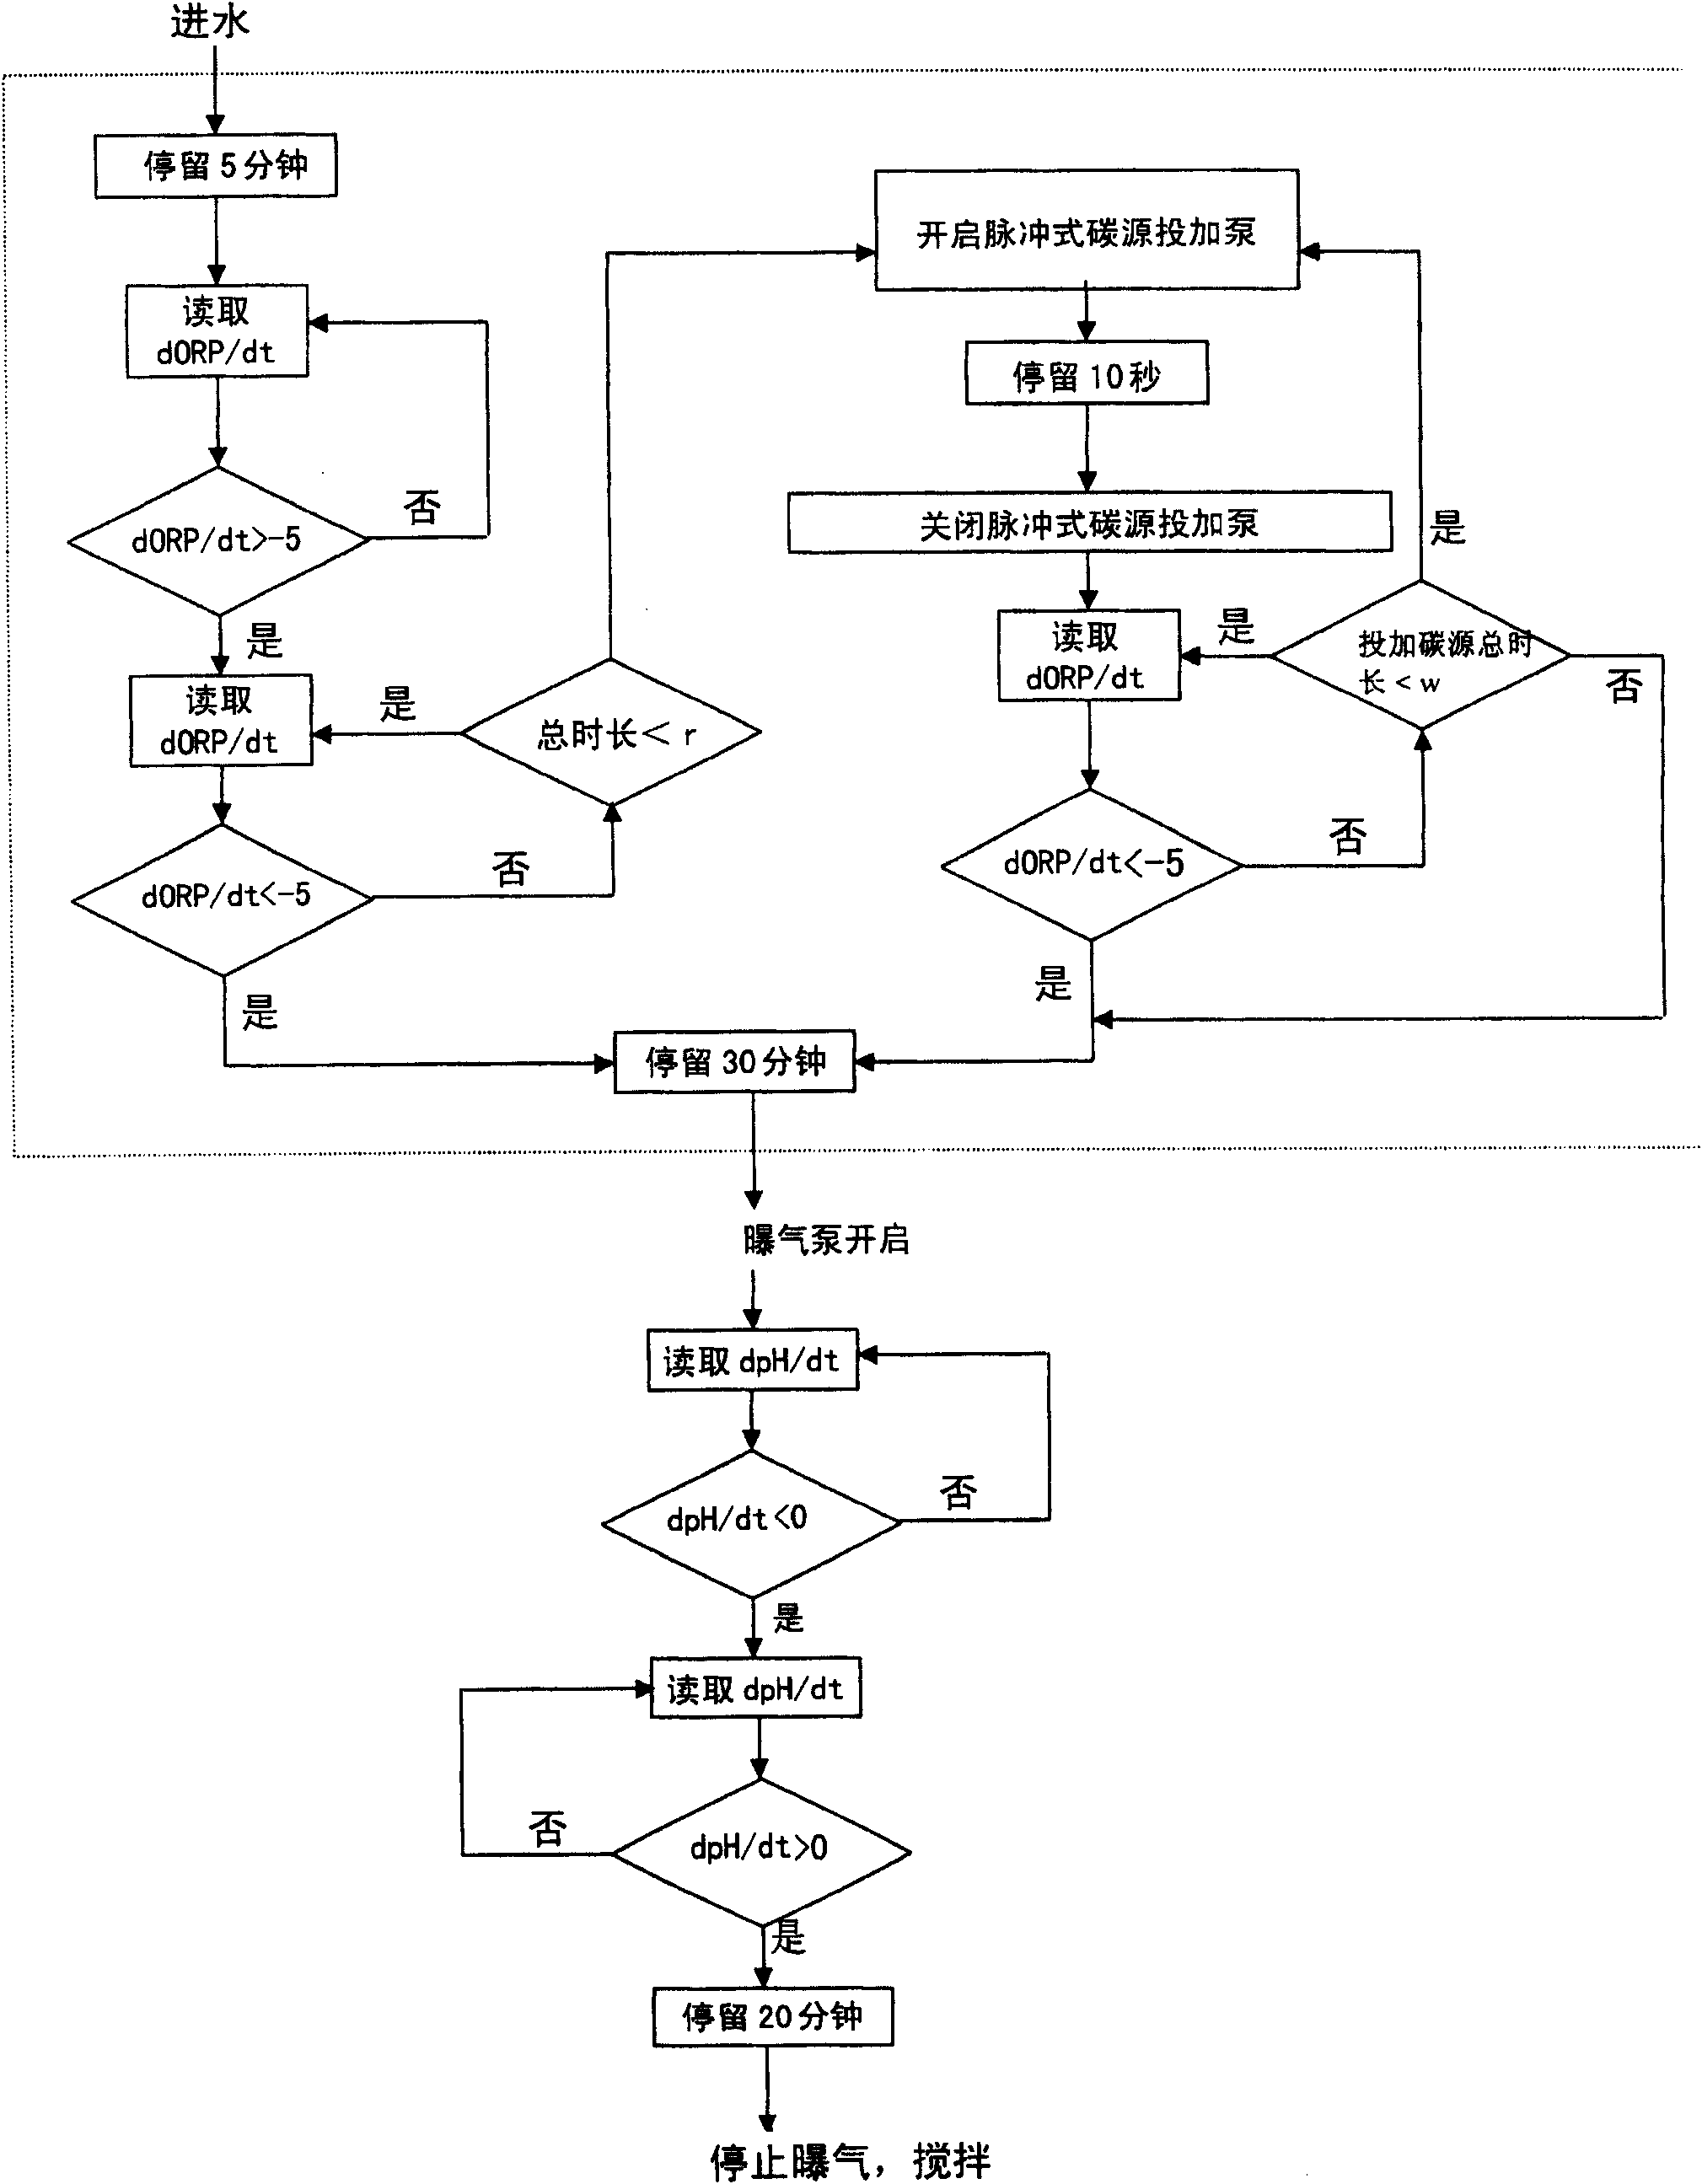 Method for adding a denitriding sequencing batch reactor activated sludge reaction carbon source